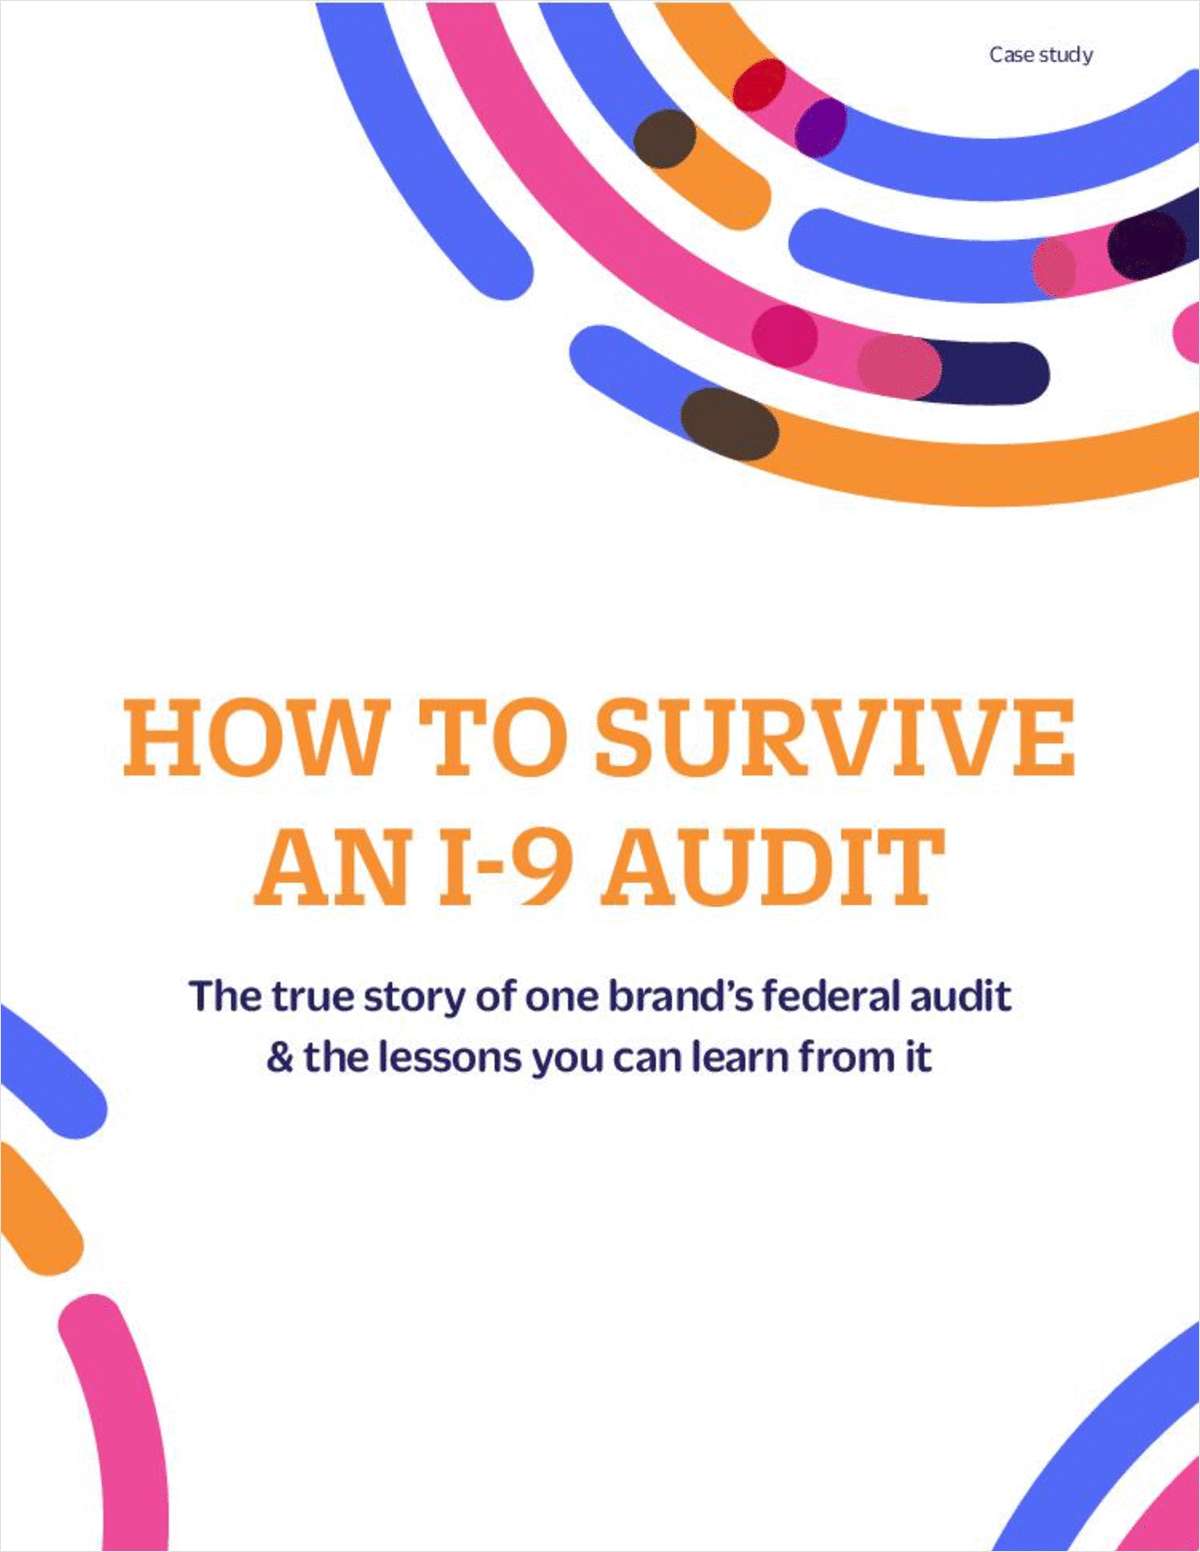 How to Survive an I-9 Audit